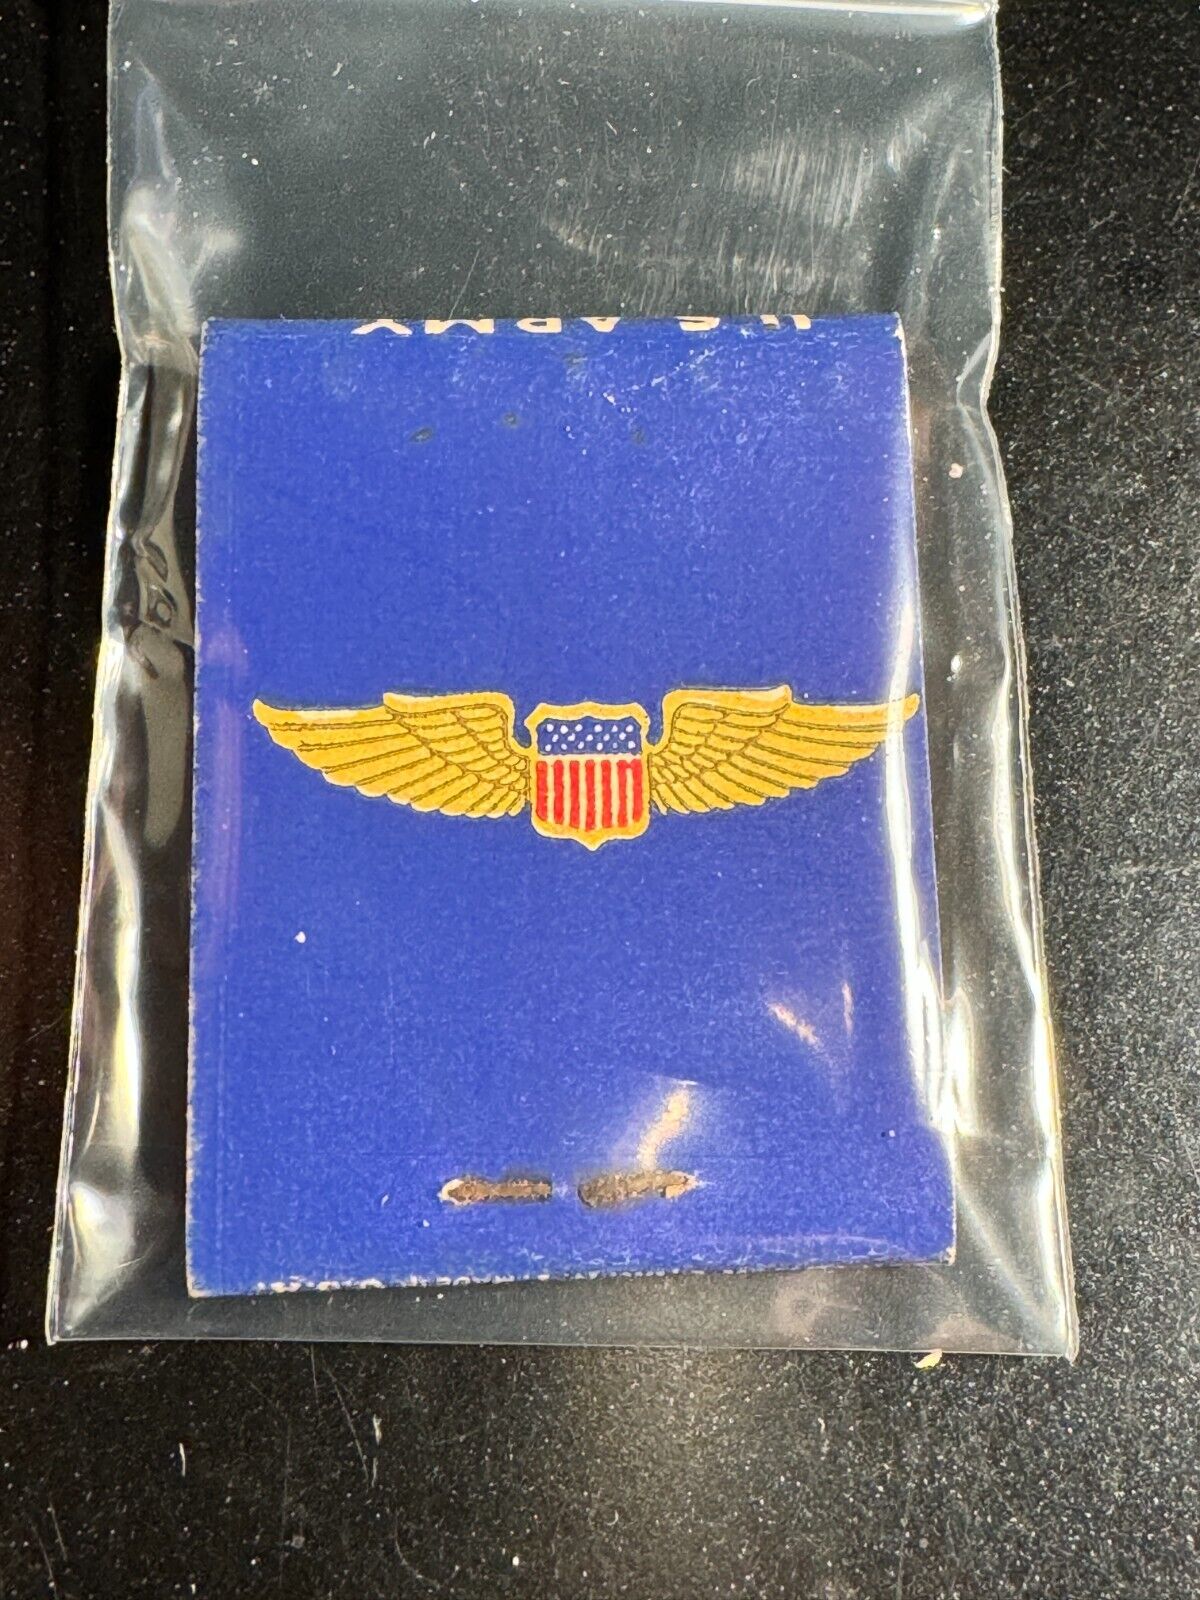 MATCHBOOK - US ARMY AIR FORCES - UNSTRUCK